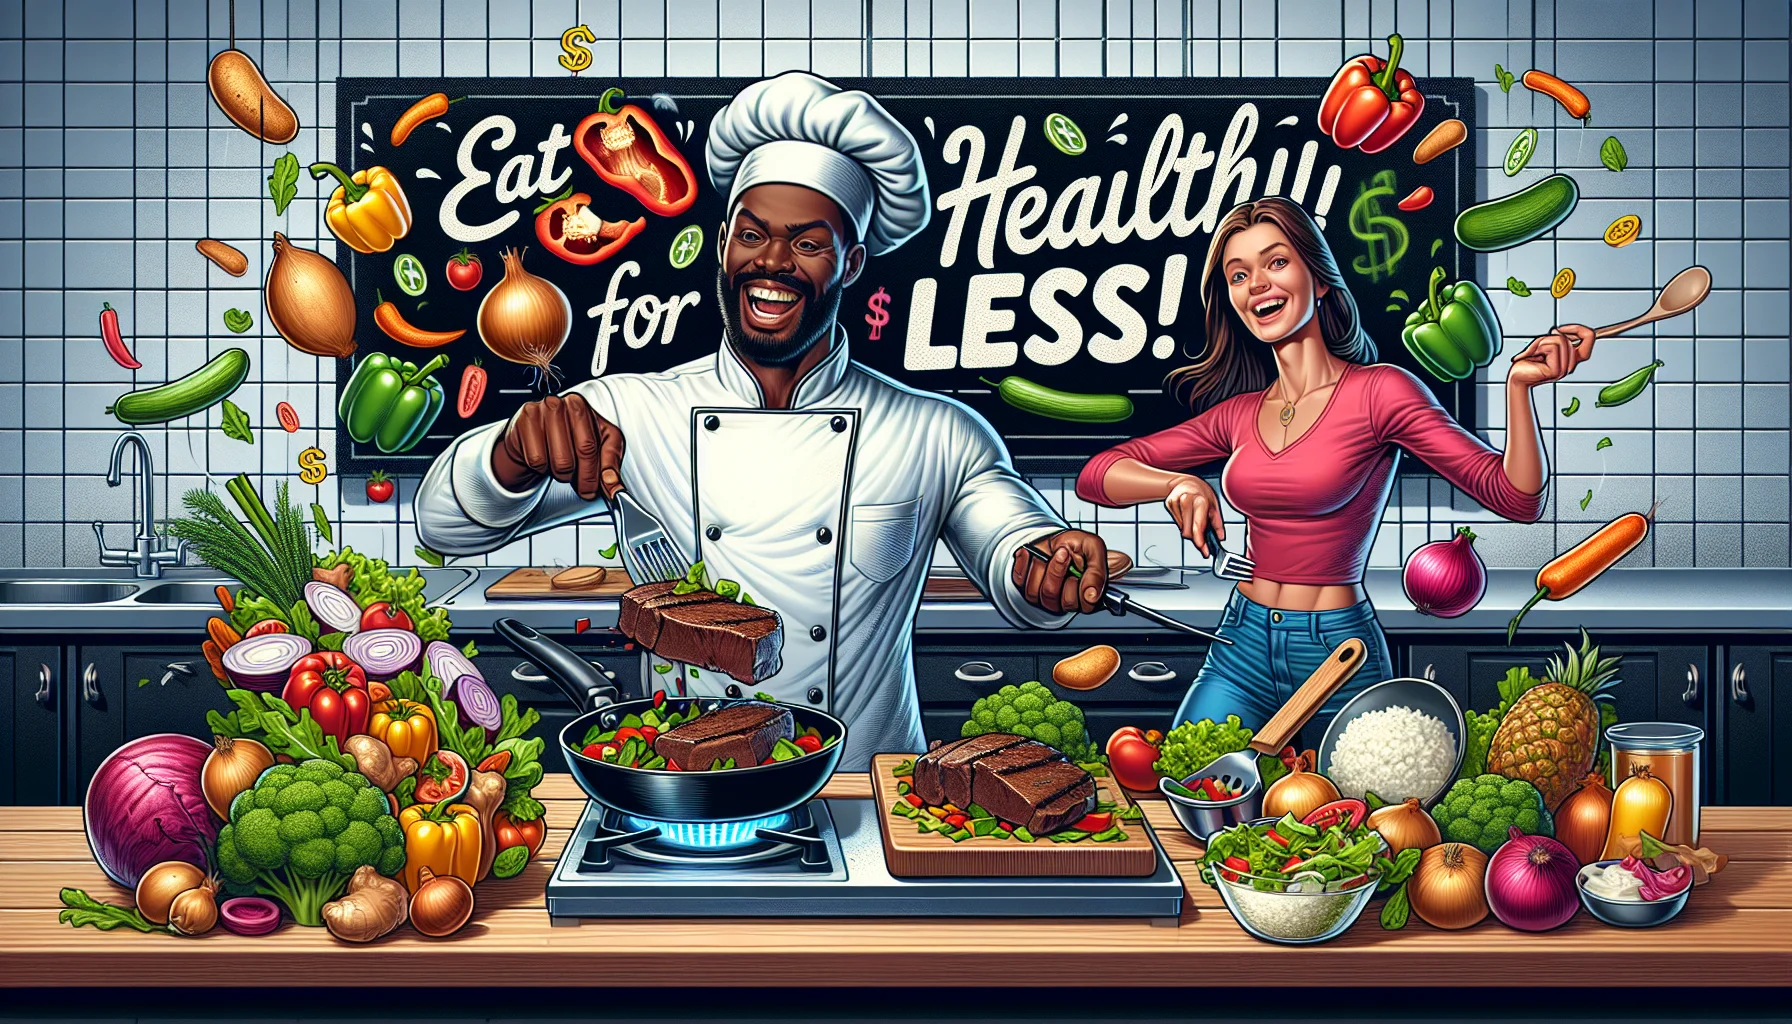 Create a detailed and comical image demonstrating the preparation of a healthy, affordable beef chuck recipe. In the bustling kitchen, a Black male chef in a traditional chef's outfit is juggling colorful fresh veggies, like bell peppers, onions, and tomatoes with humorous concentration. On the other side of the counter, a Caucasian woman flips a piece of well-marinated beef chuck in a sizzling skillet with style and a cheeky grin. A large chalkboard sign in the background displays 'Eat healthy for less!' in playful, cartoon-like typography, with flying dollar signs and salads around it. The atmosphere is full of fun, and the delicious aroma suggests a tasty, wallet-friendly meal in progress.